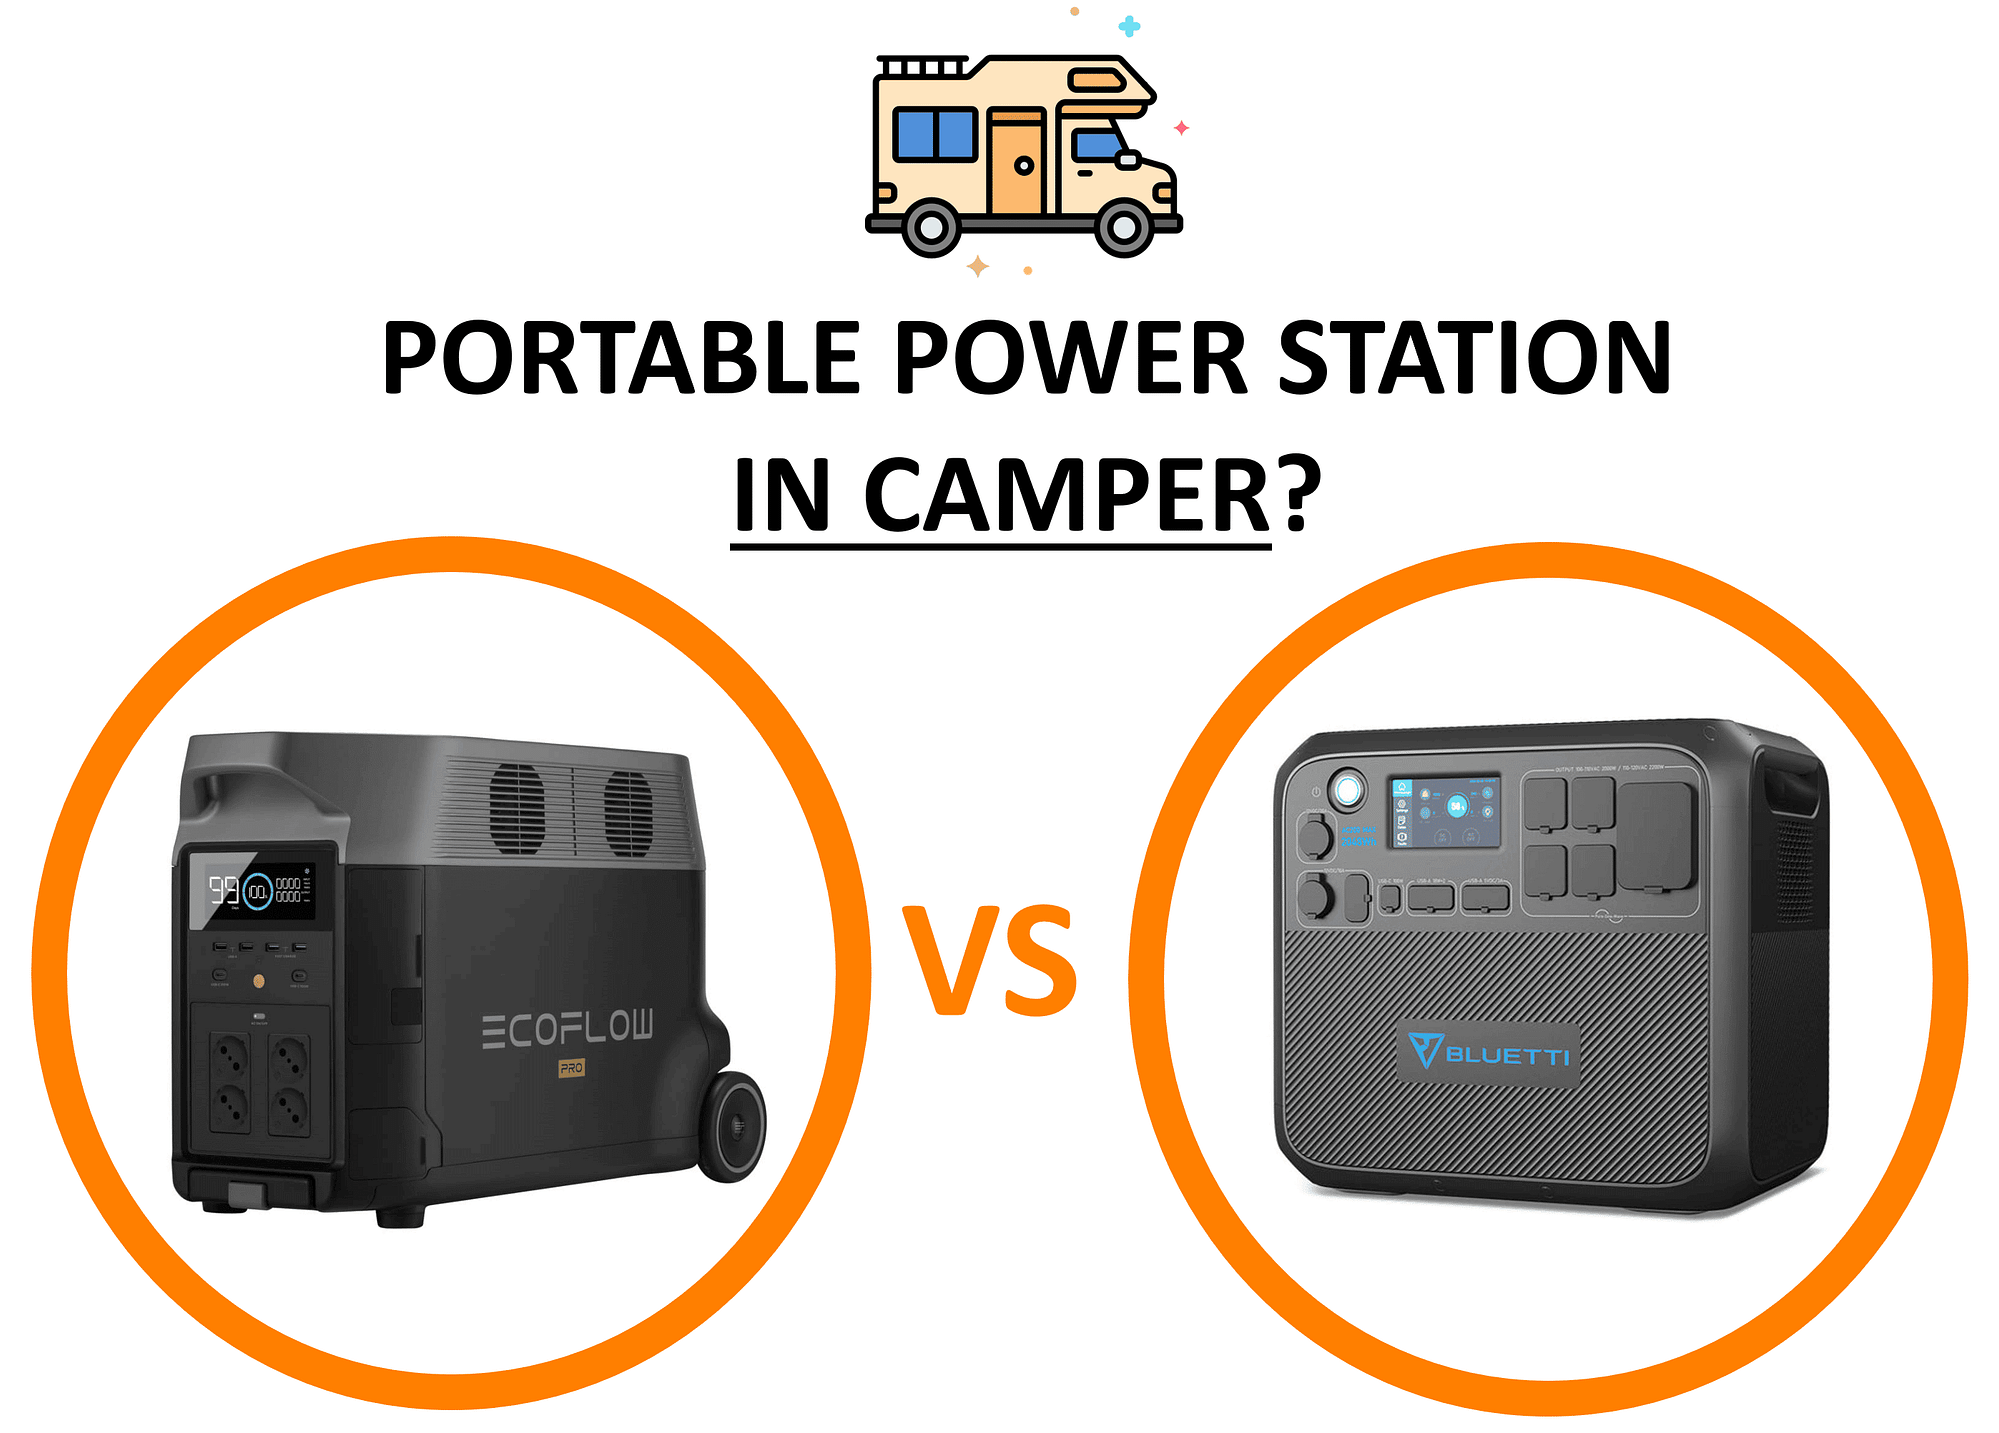 bluetti vs ecoflow - which is better - portable power station for camper camping review